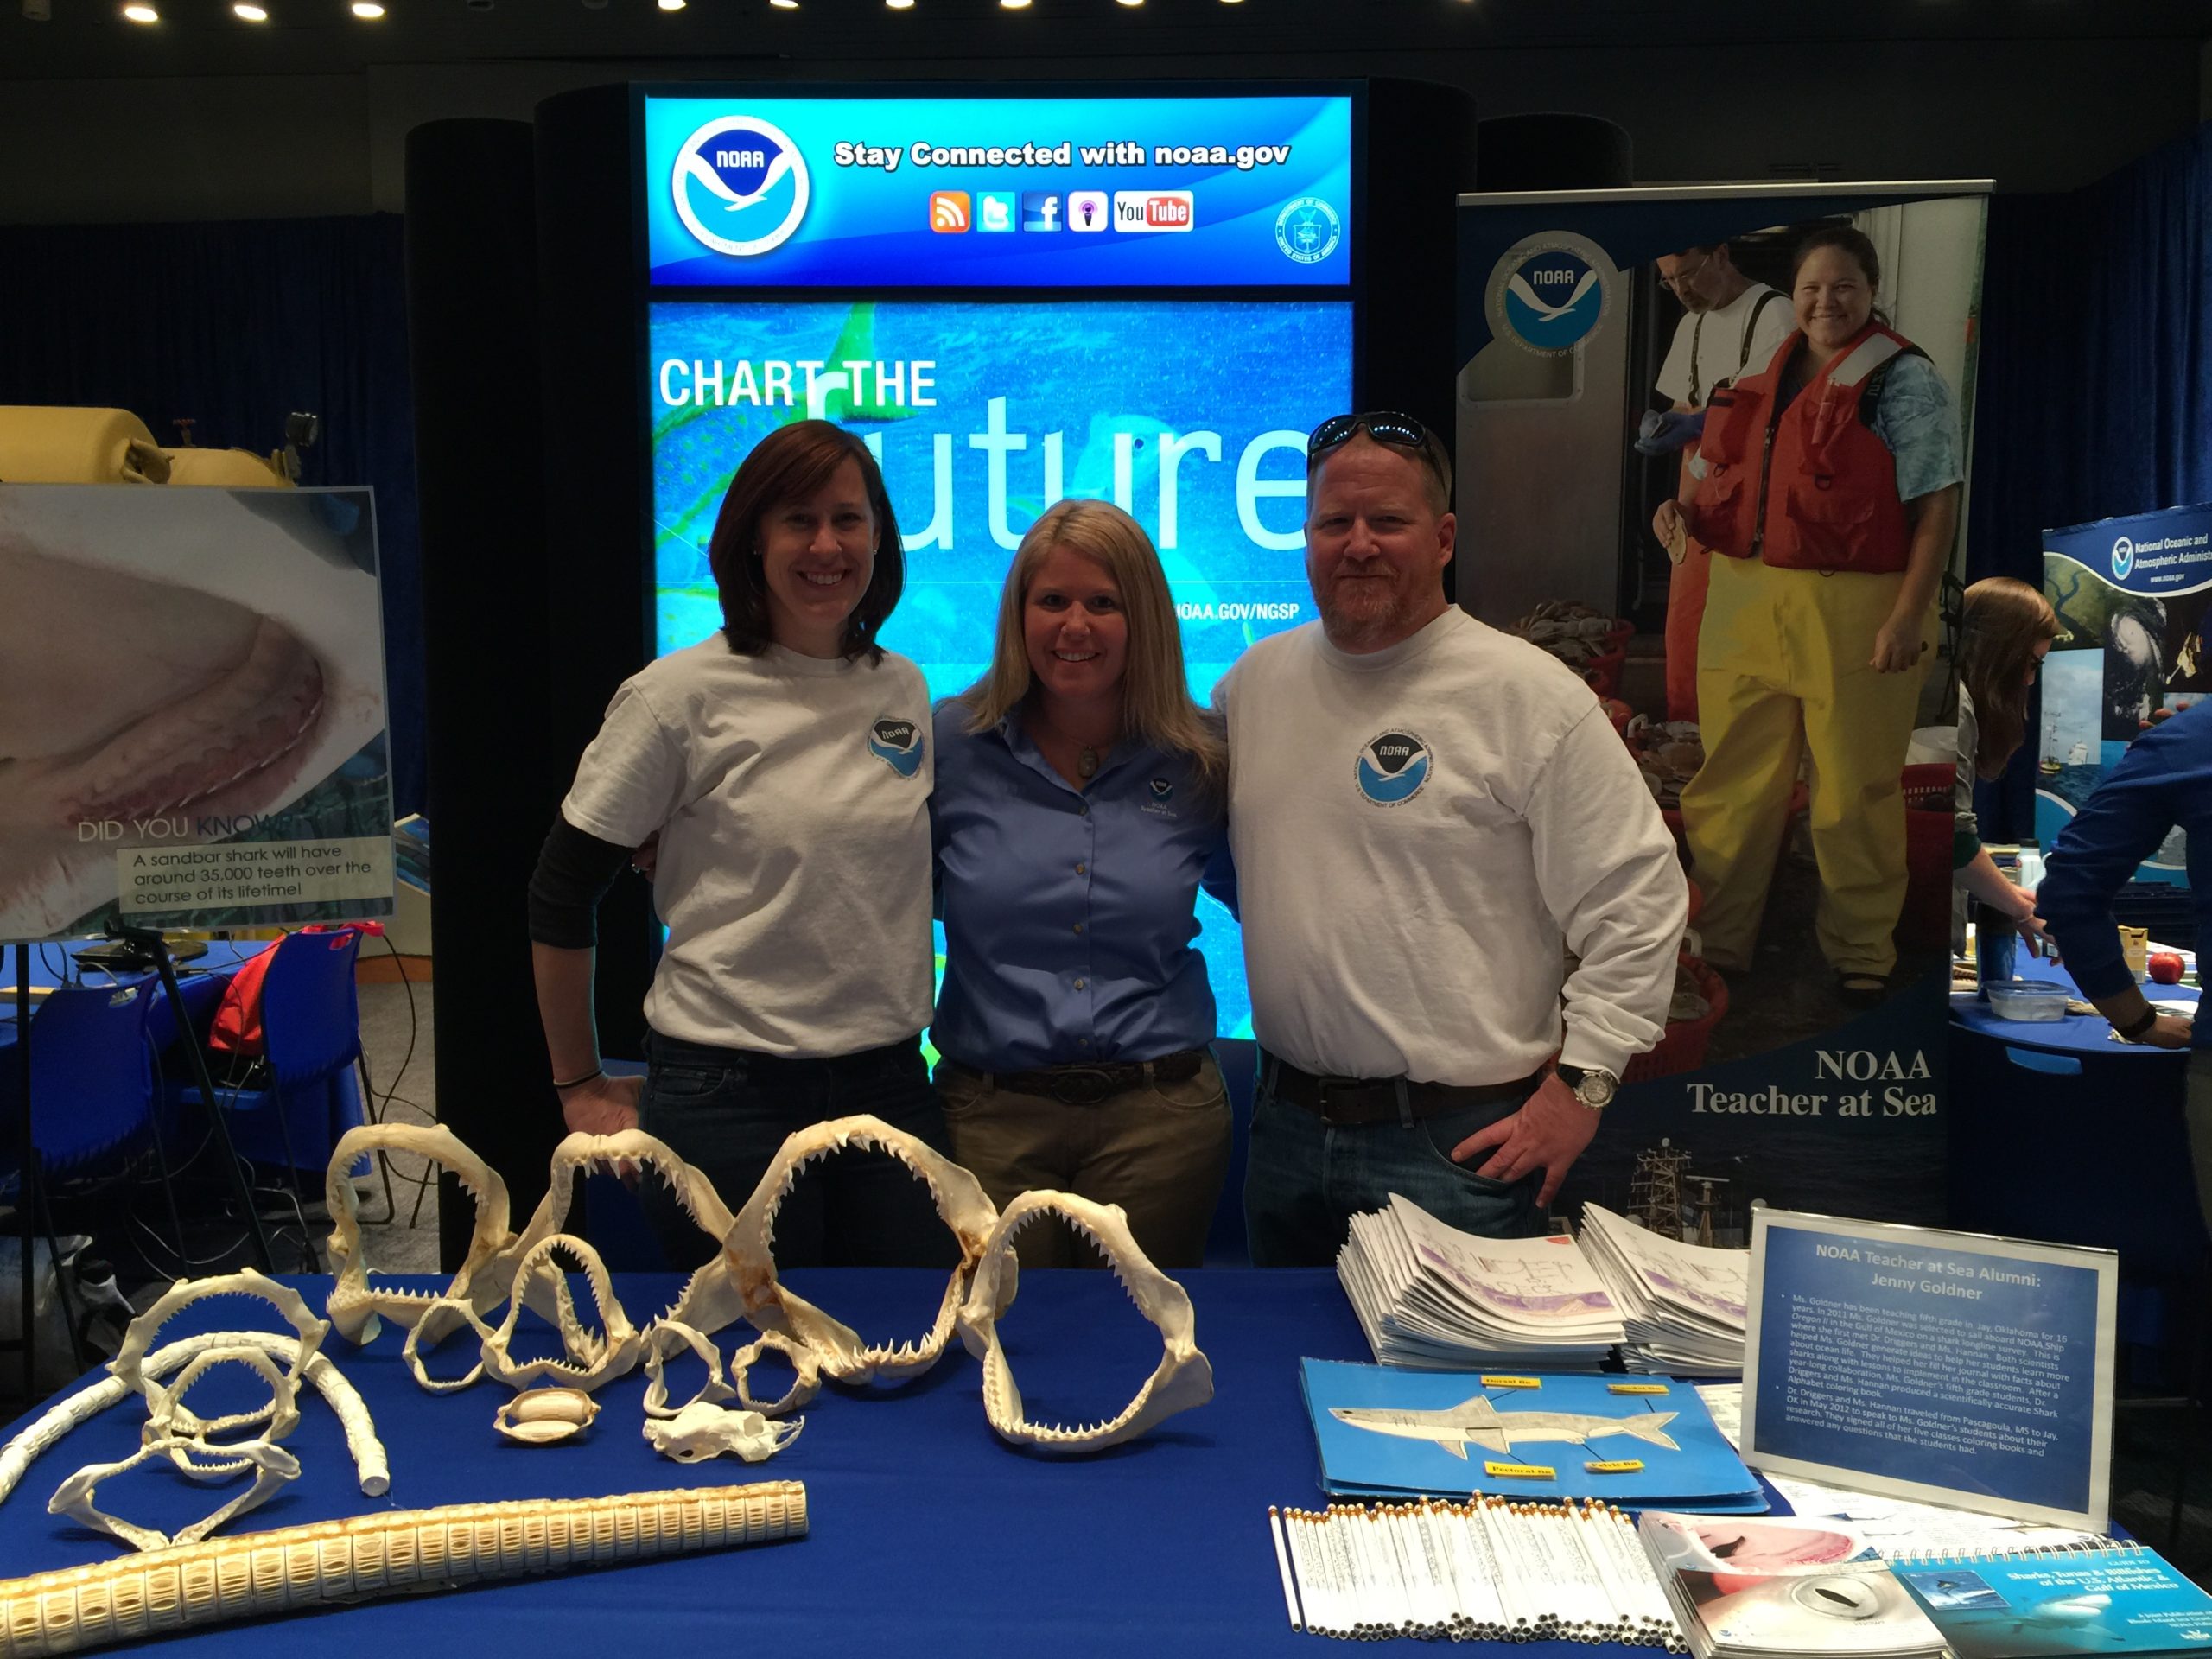 Two women and a man stand behind a table with shark items on it. There is NOAA signage in the background.